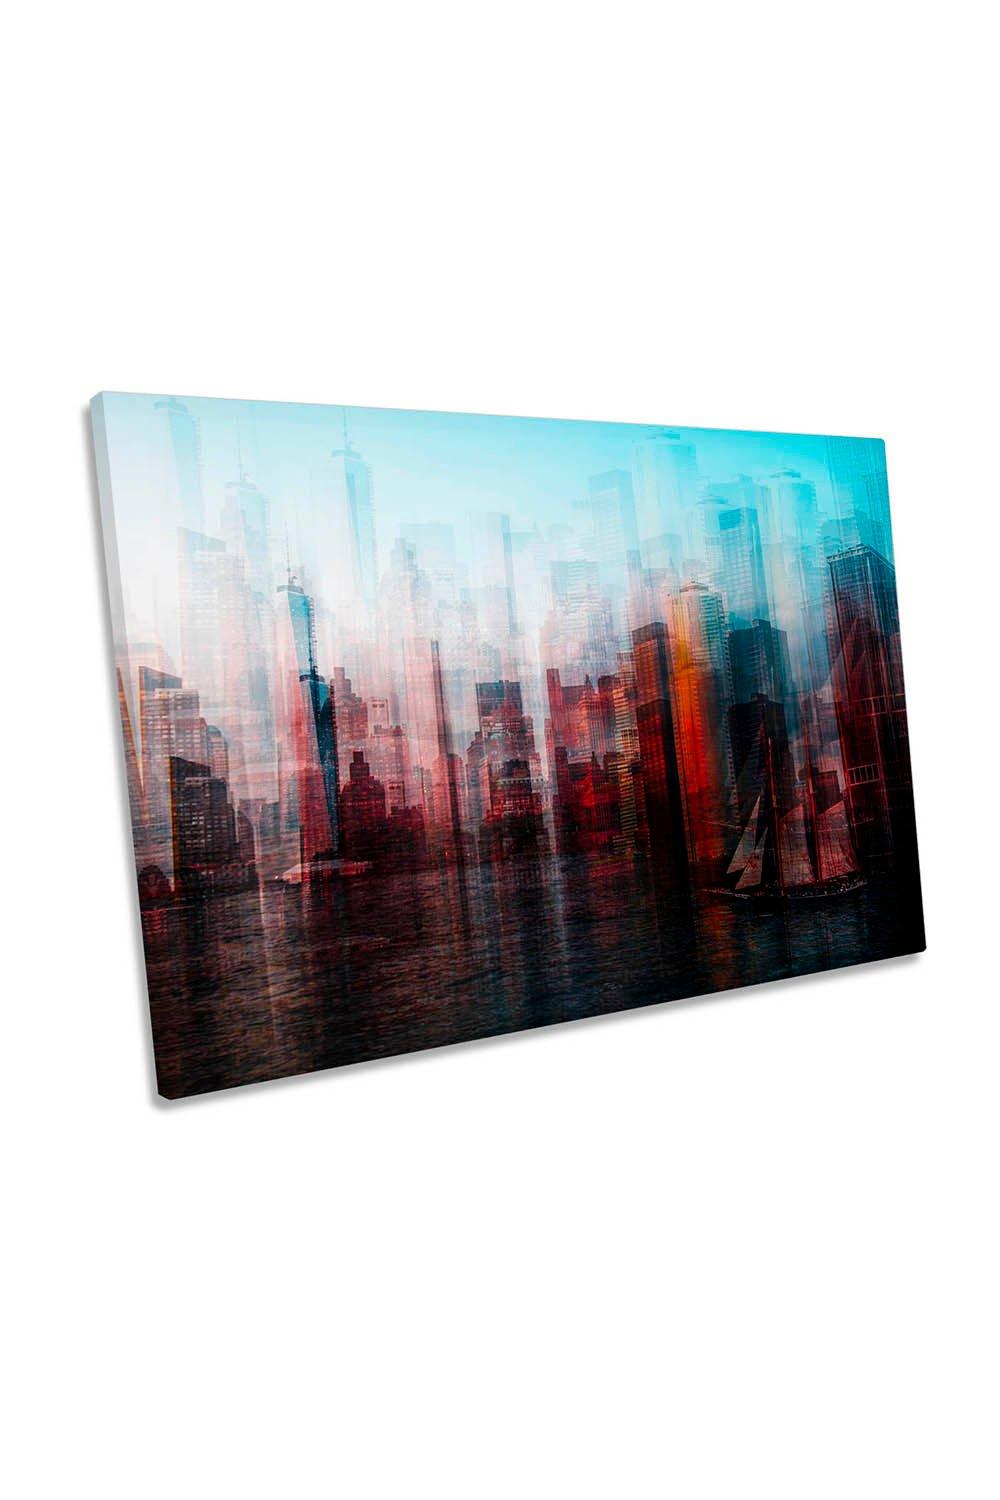 Manhattan Abstract New York City Canvas Wall Art Picture Print